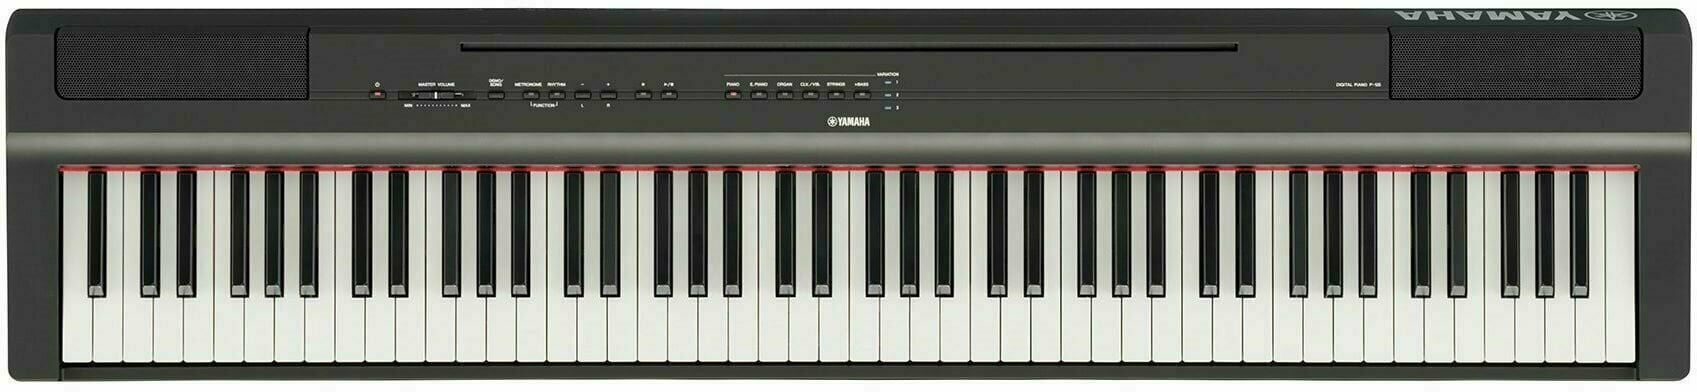 Digitaal stagepiano Yamaha P125A Digitaal stagepiano